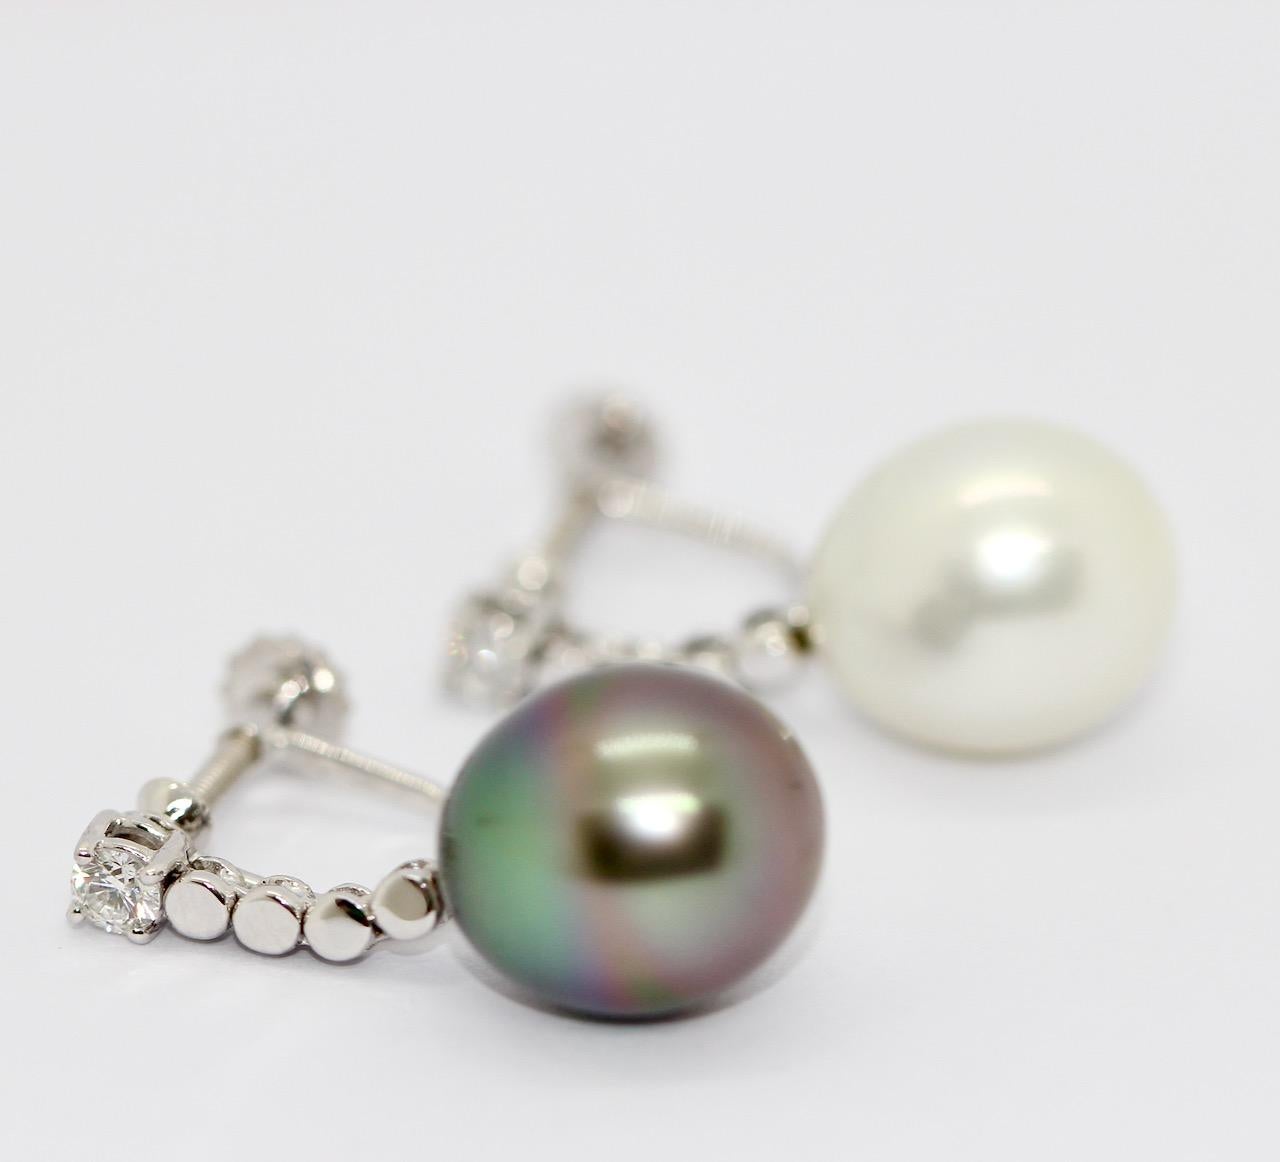 Diamond Gold Earrings set with white and gray South Sea Pearl, Tahitian Pearl For Sale 6